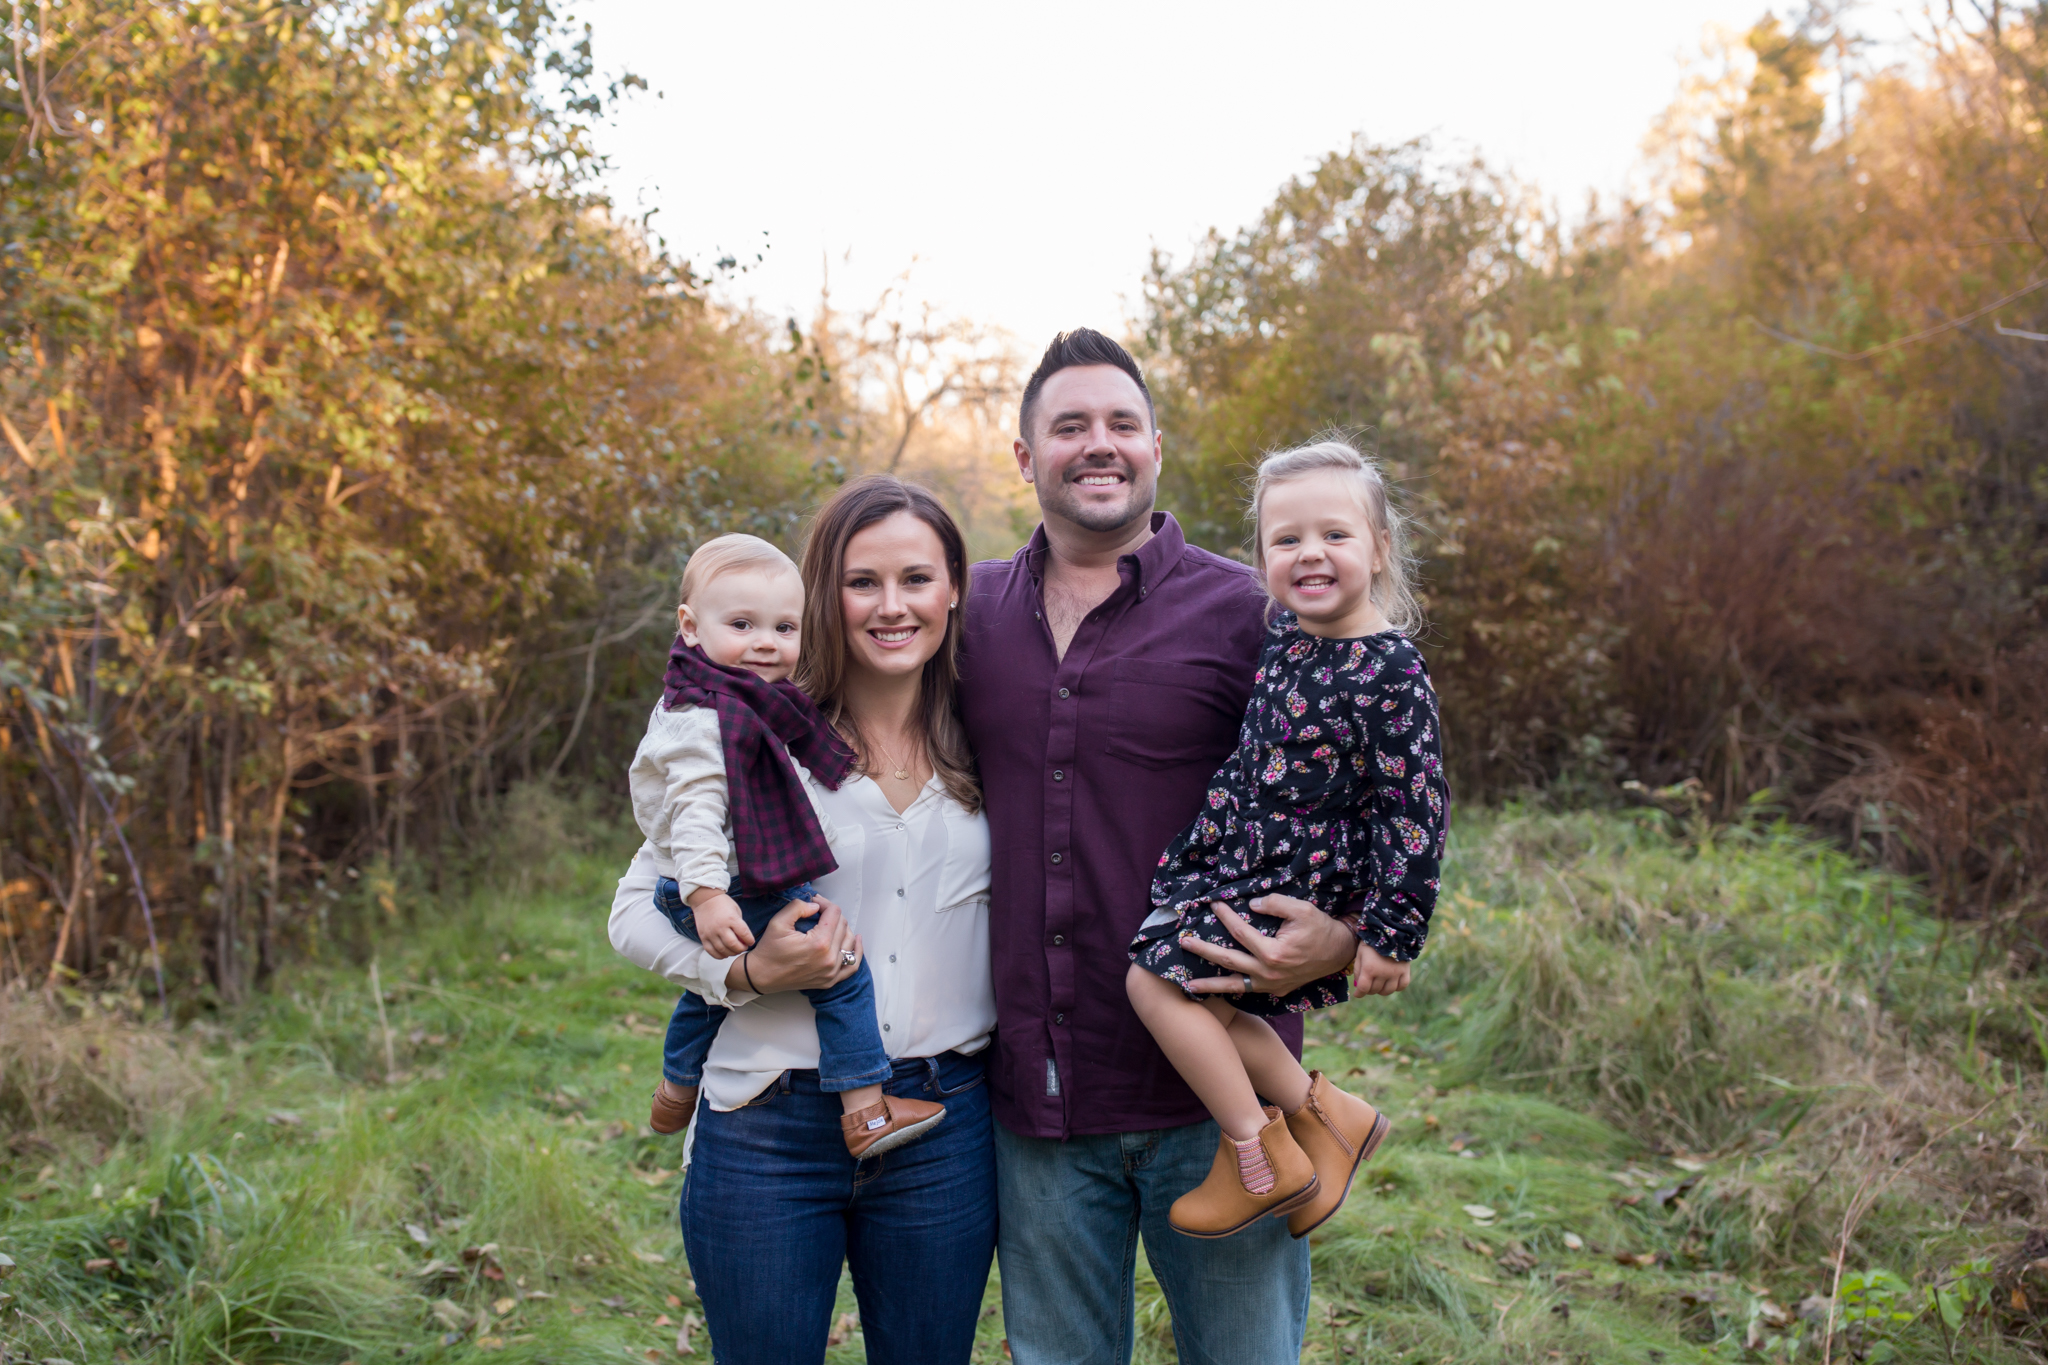 Hailey Family Fall Session, 2 kinds, family poses with young kids, Cara Peterson Photography Rockford IL-5.jpg